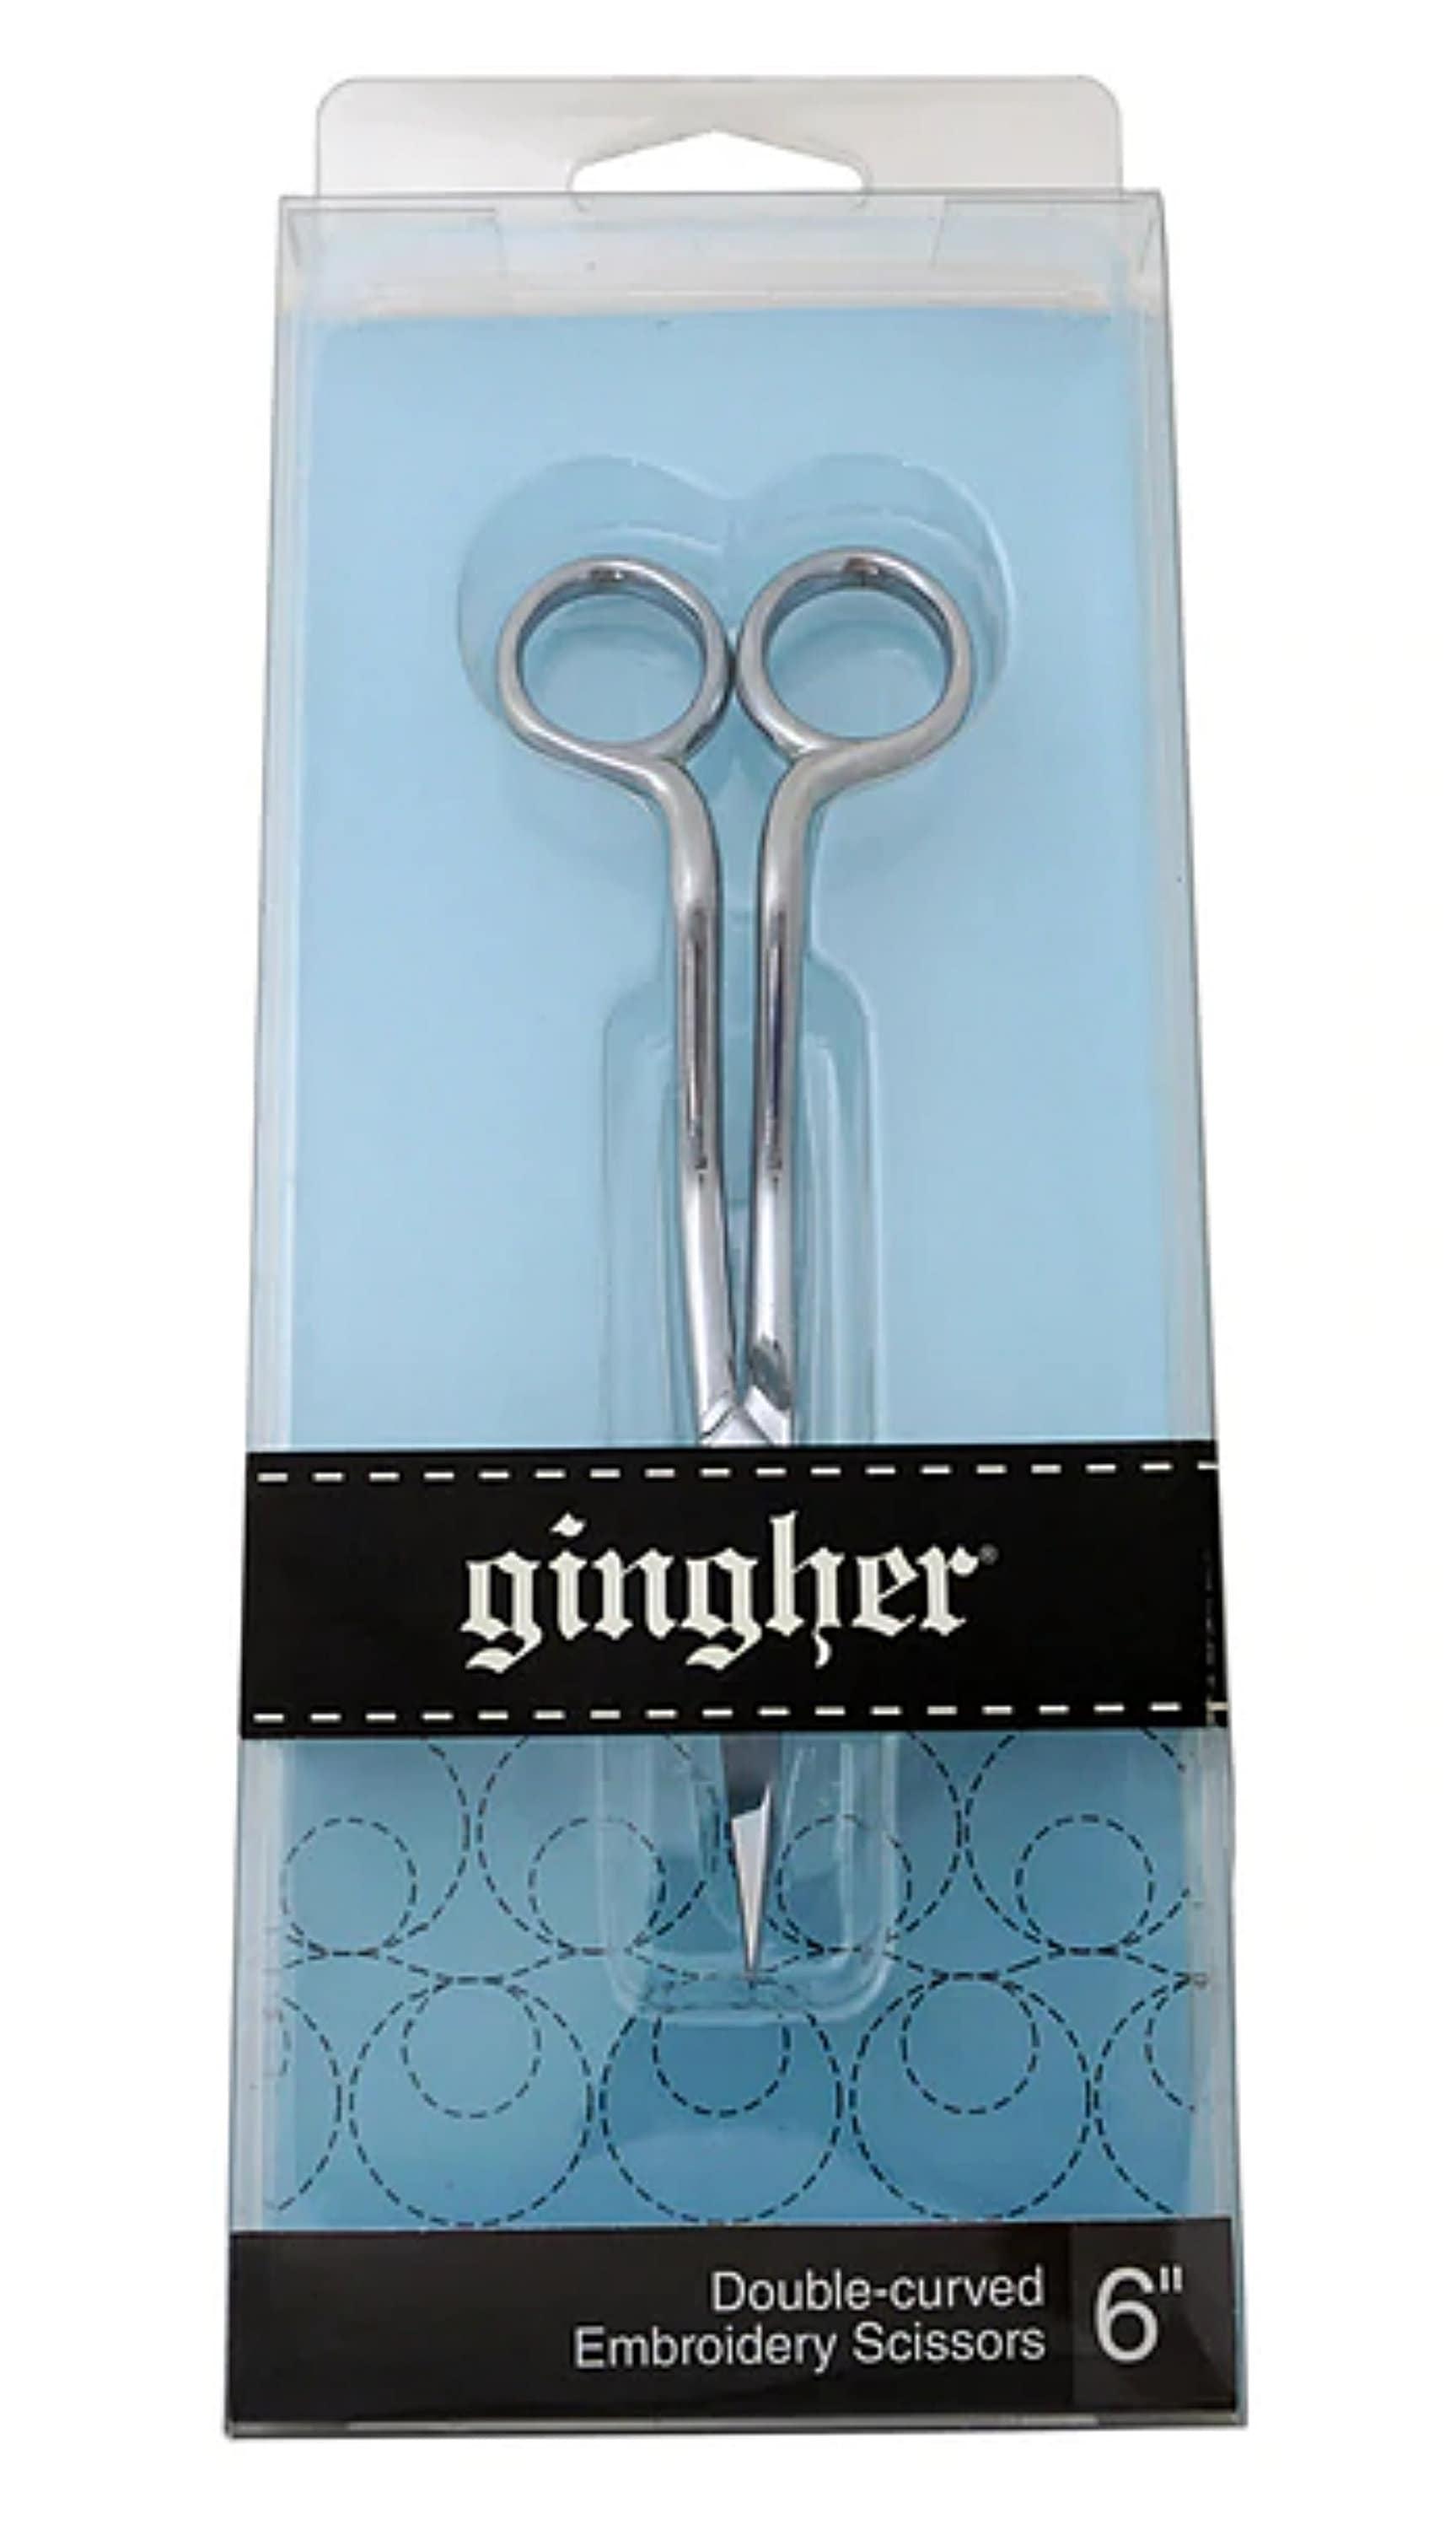 FE- 6 Double Curved machine Embroidery Scissors